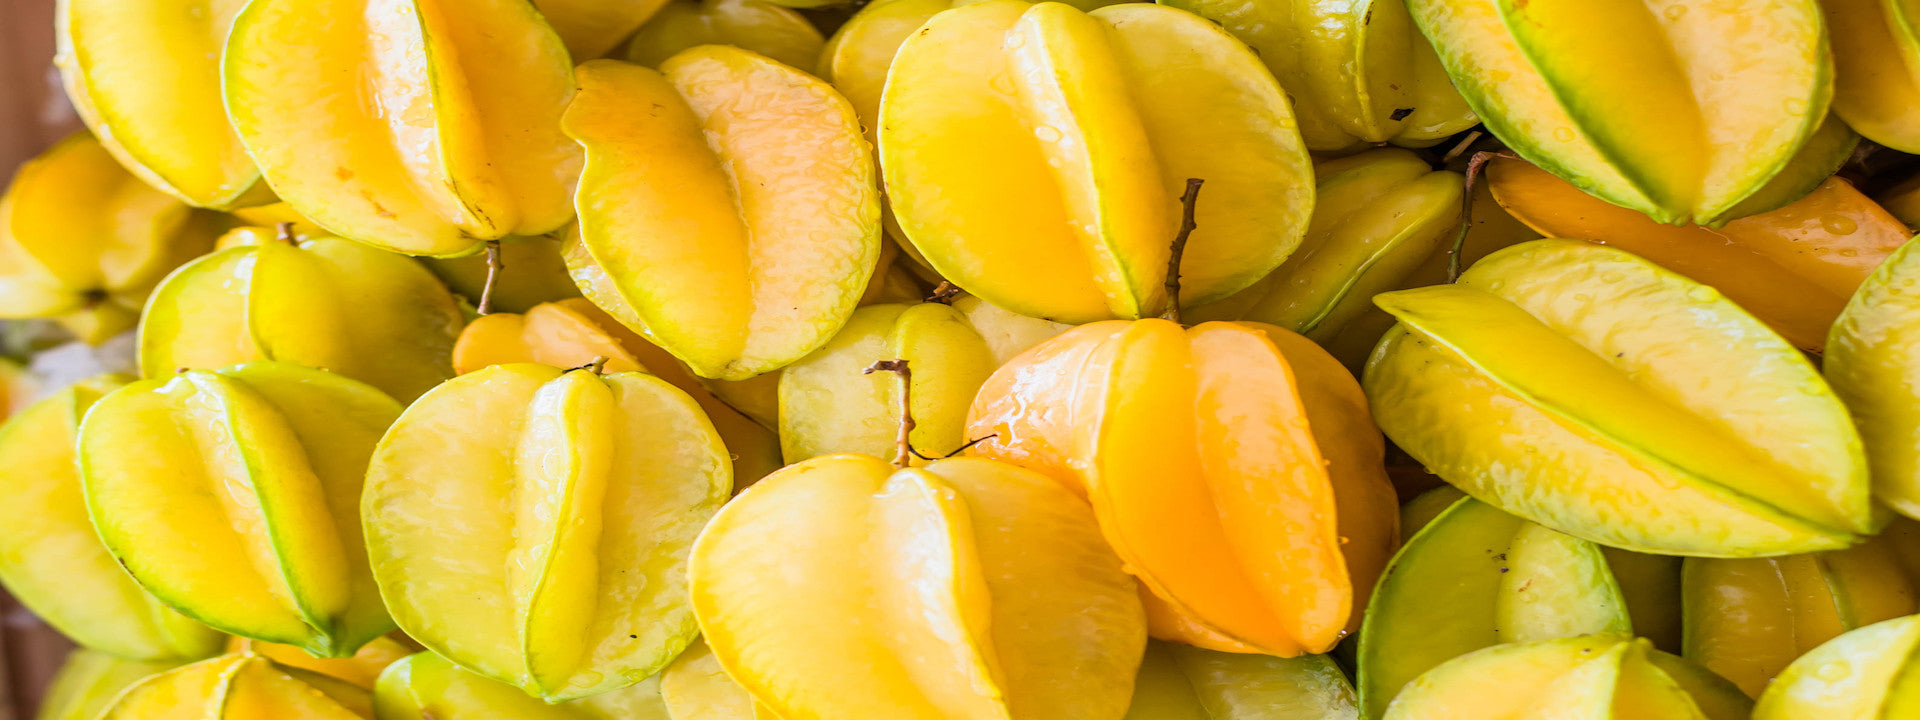 Superfood: The Star Fruit